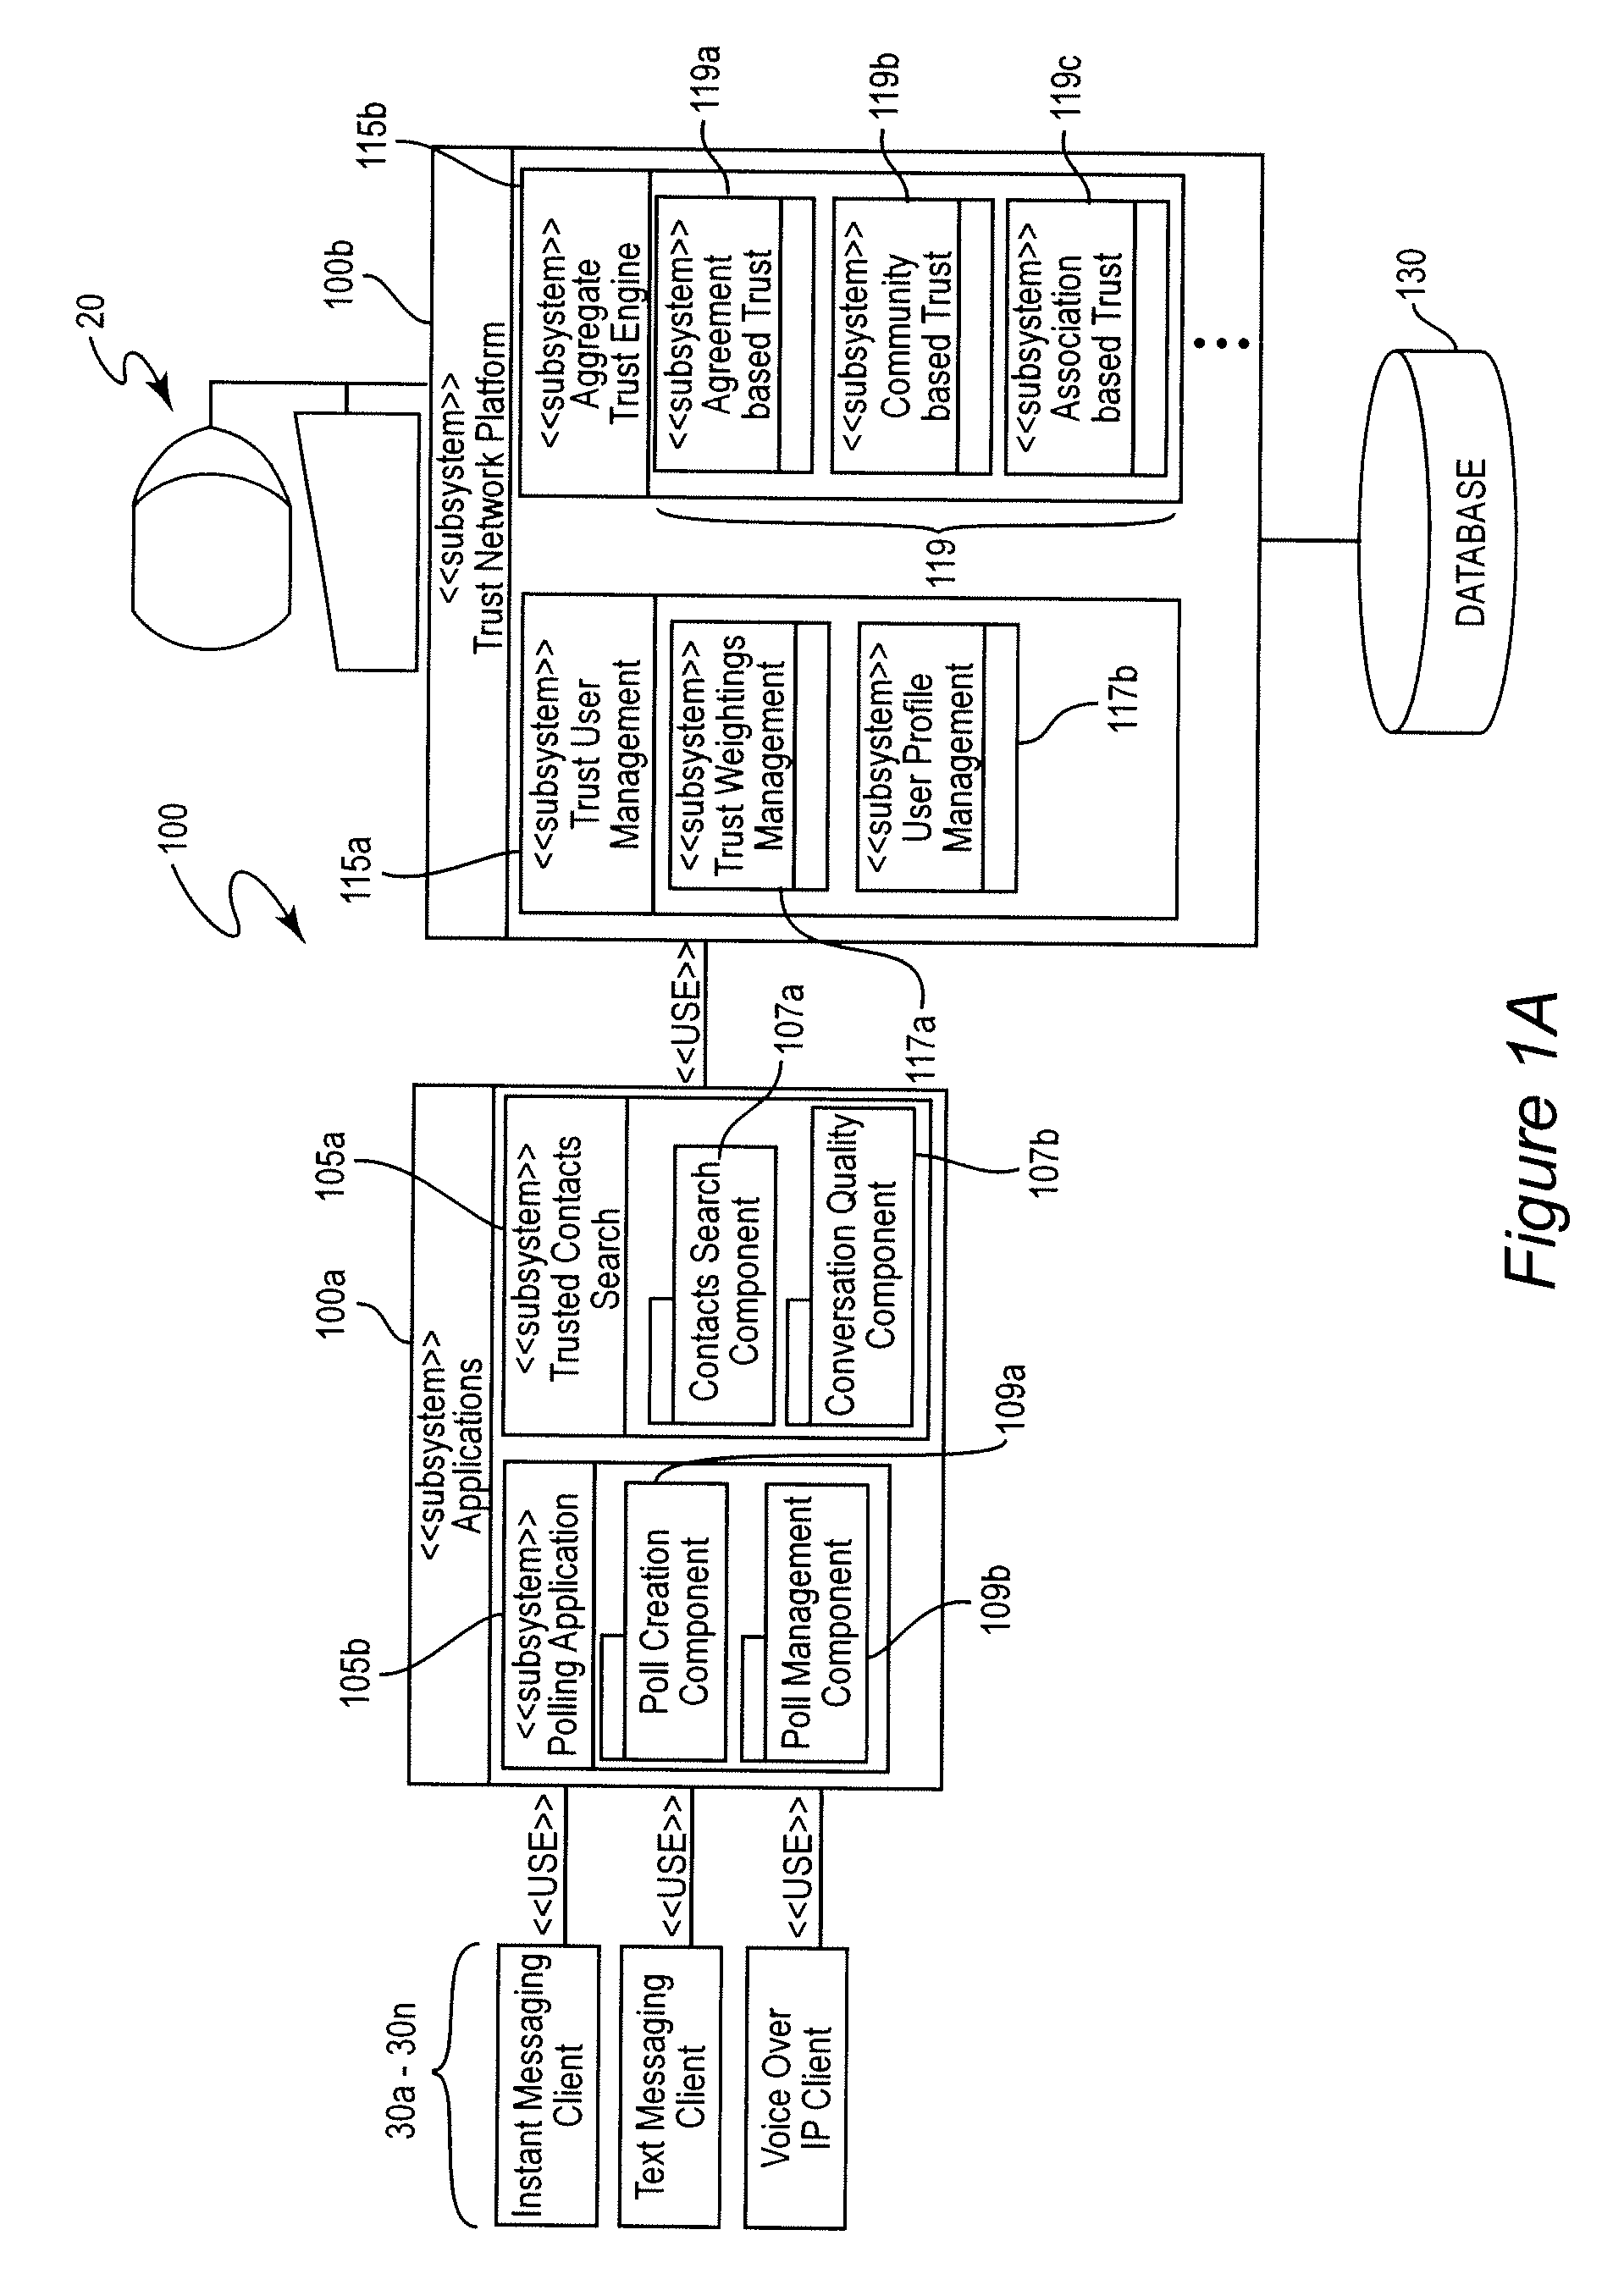 Method and Apparatus for Social Trust Networks on Messaging Platforms